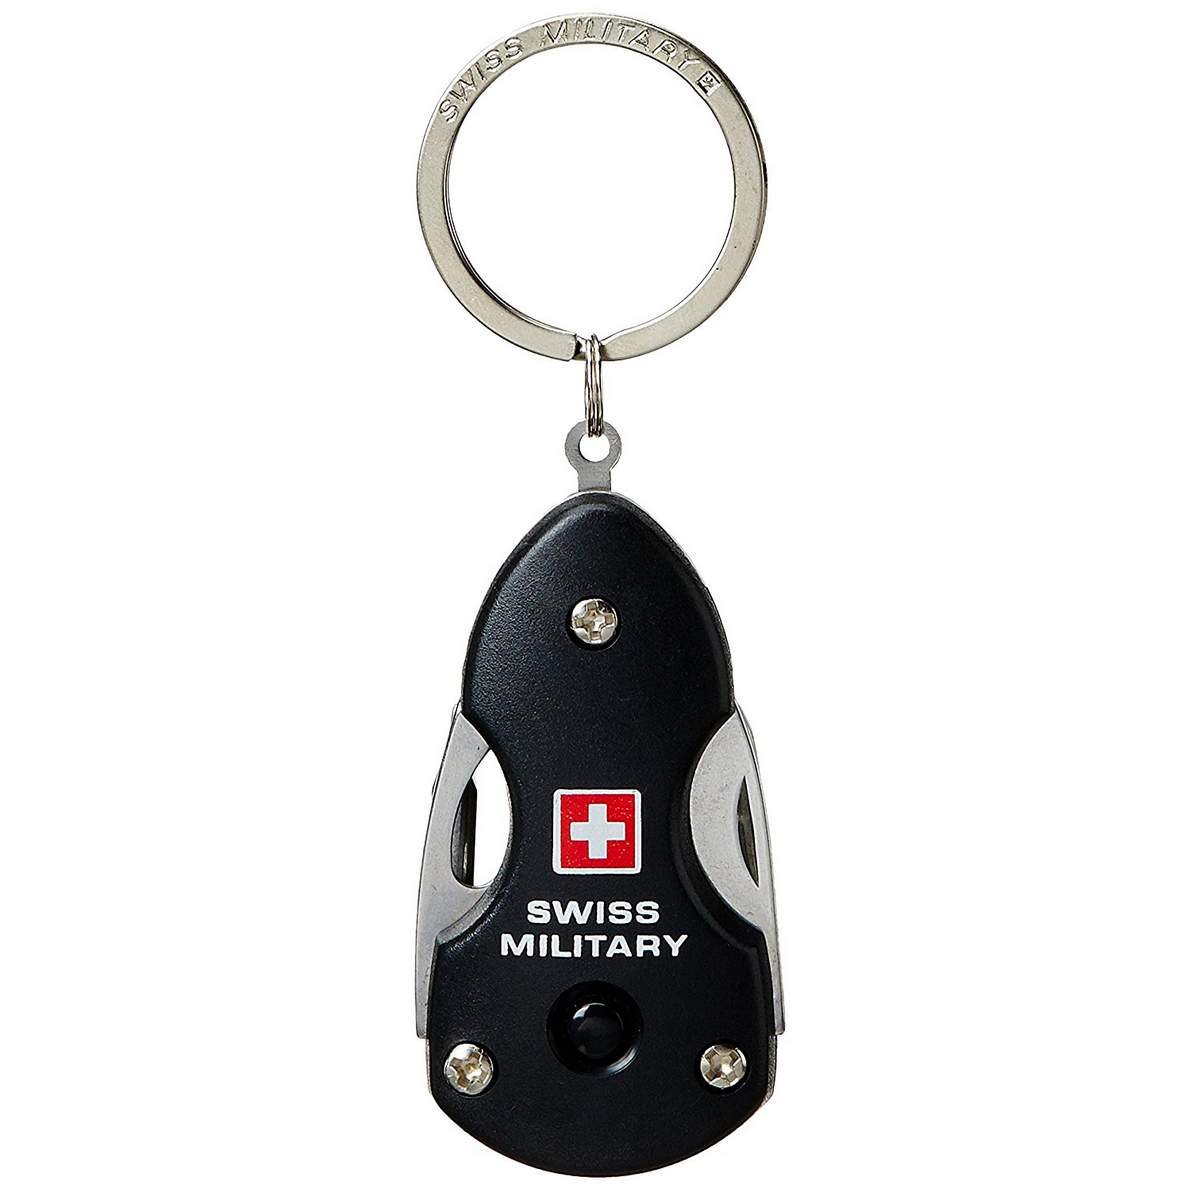 Acrylic Cloud Key Chain in Pune at best price by Balaji Corporate Gifts -  Justdial